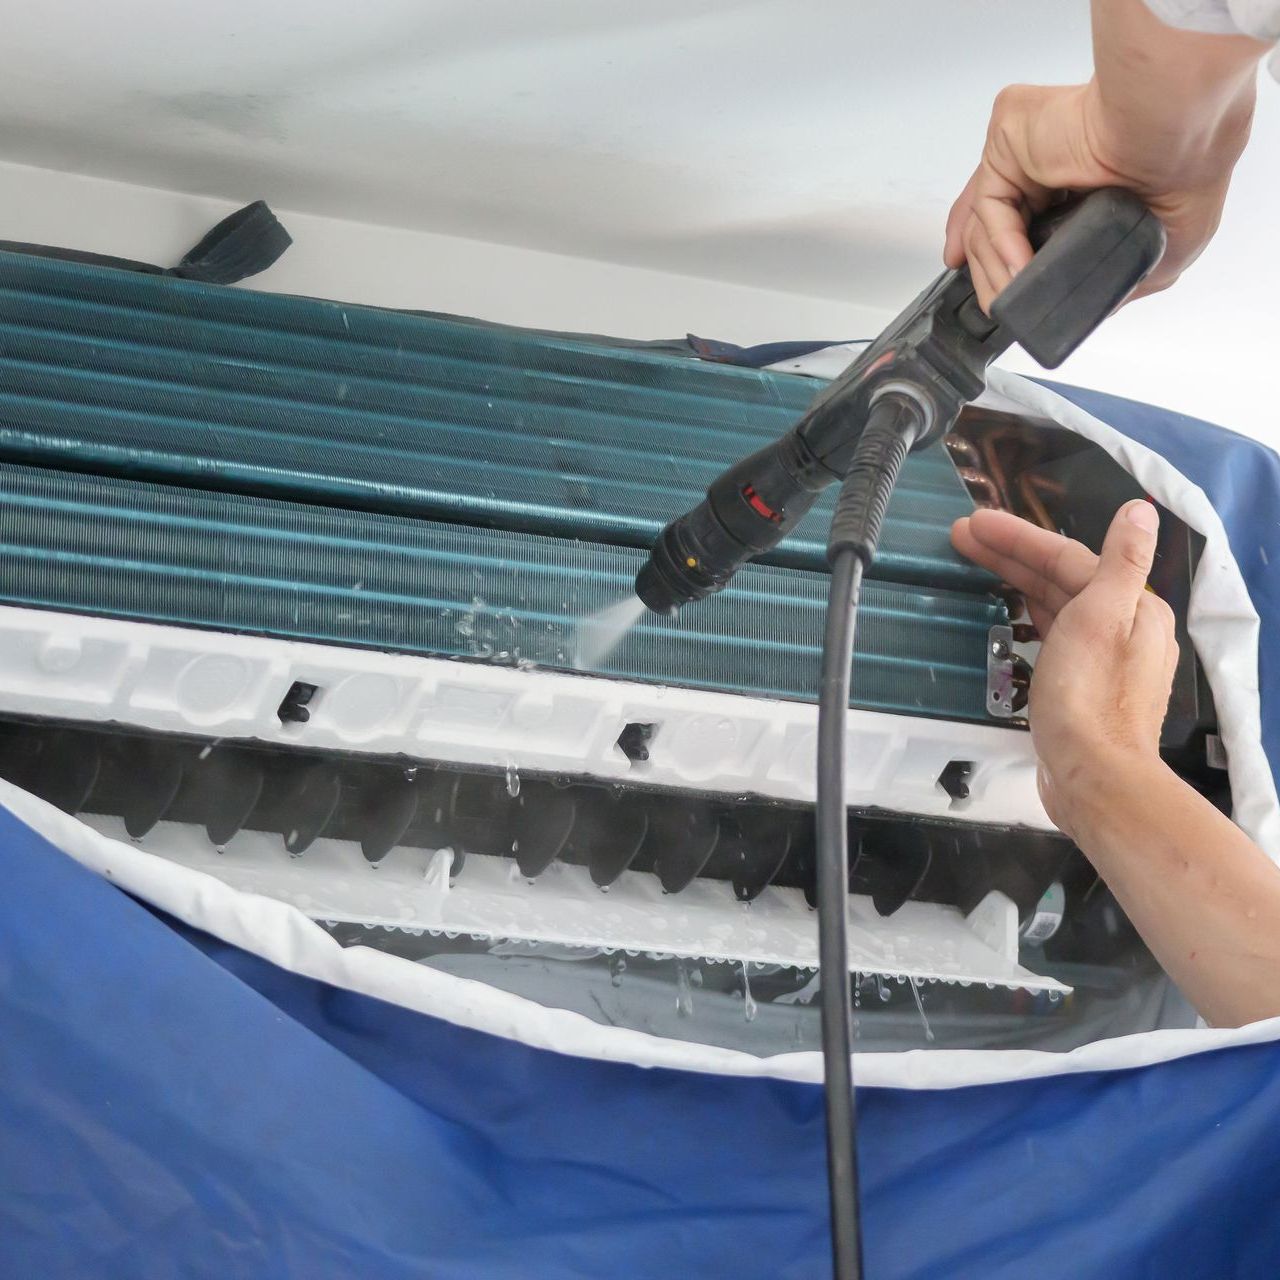 a person is cleaning an air conditioner with a vacuum cleaner .